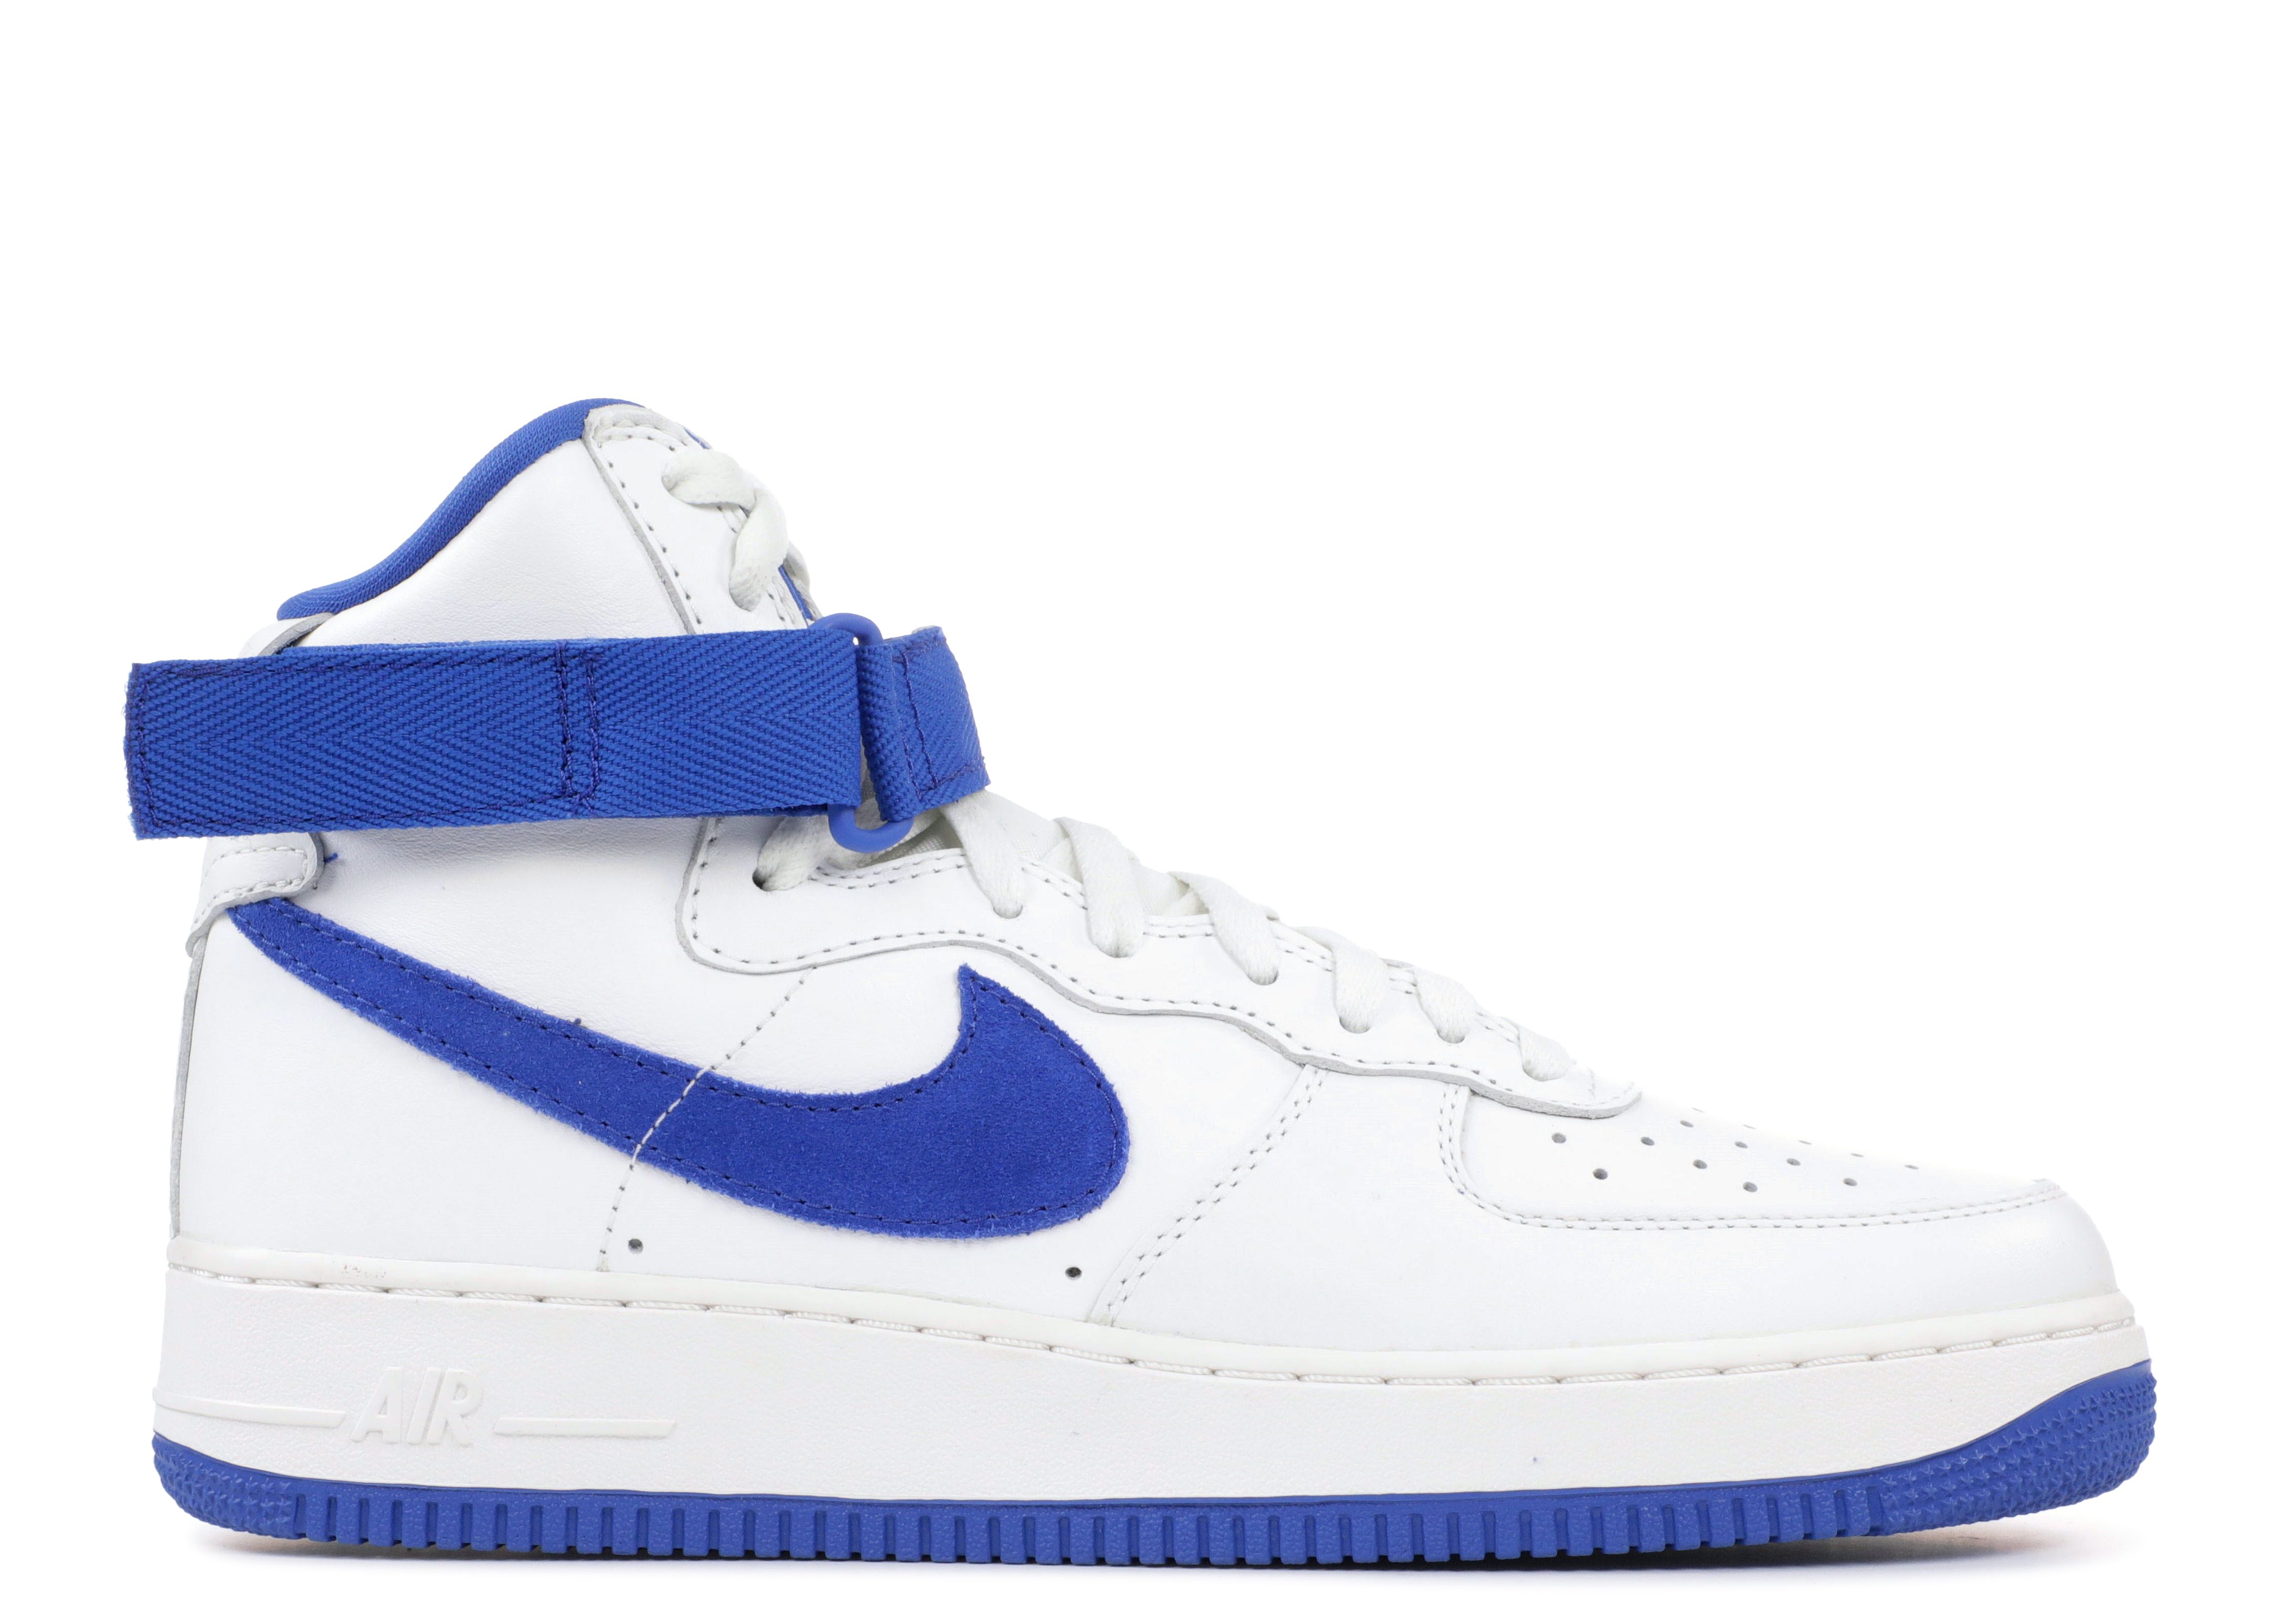 white and royal blue air force 1